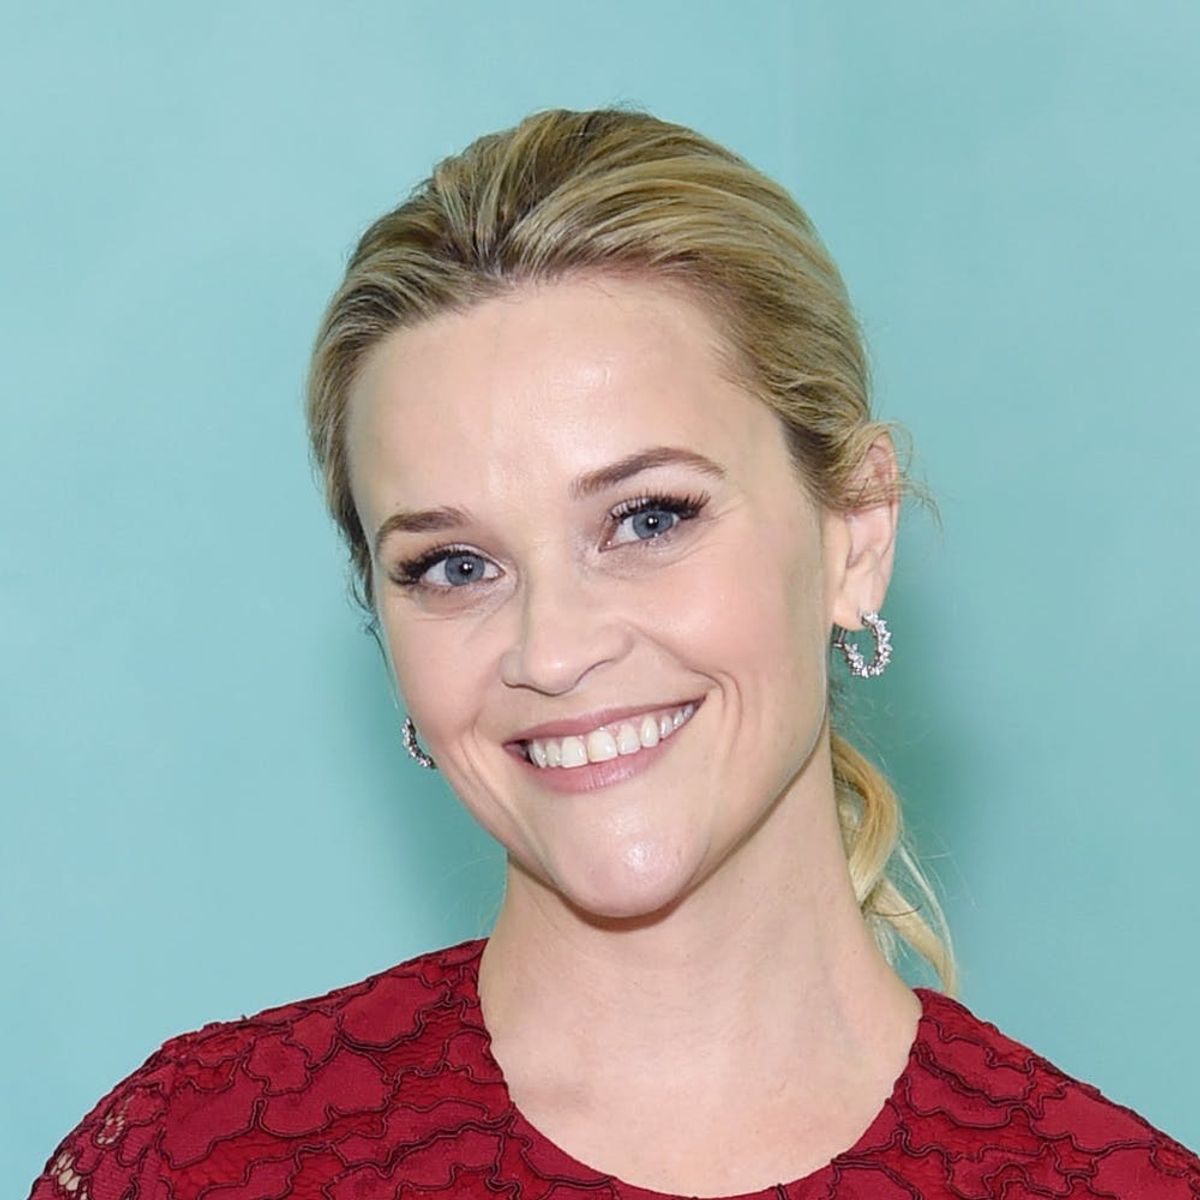 Reese Witherspoon Designed a Pin to Go With All Those Black Gowns on the 2018 Golden Globes Red Carpet